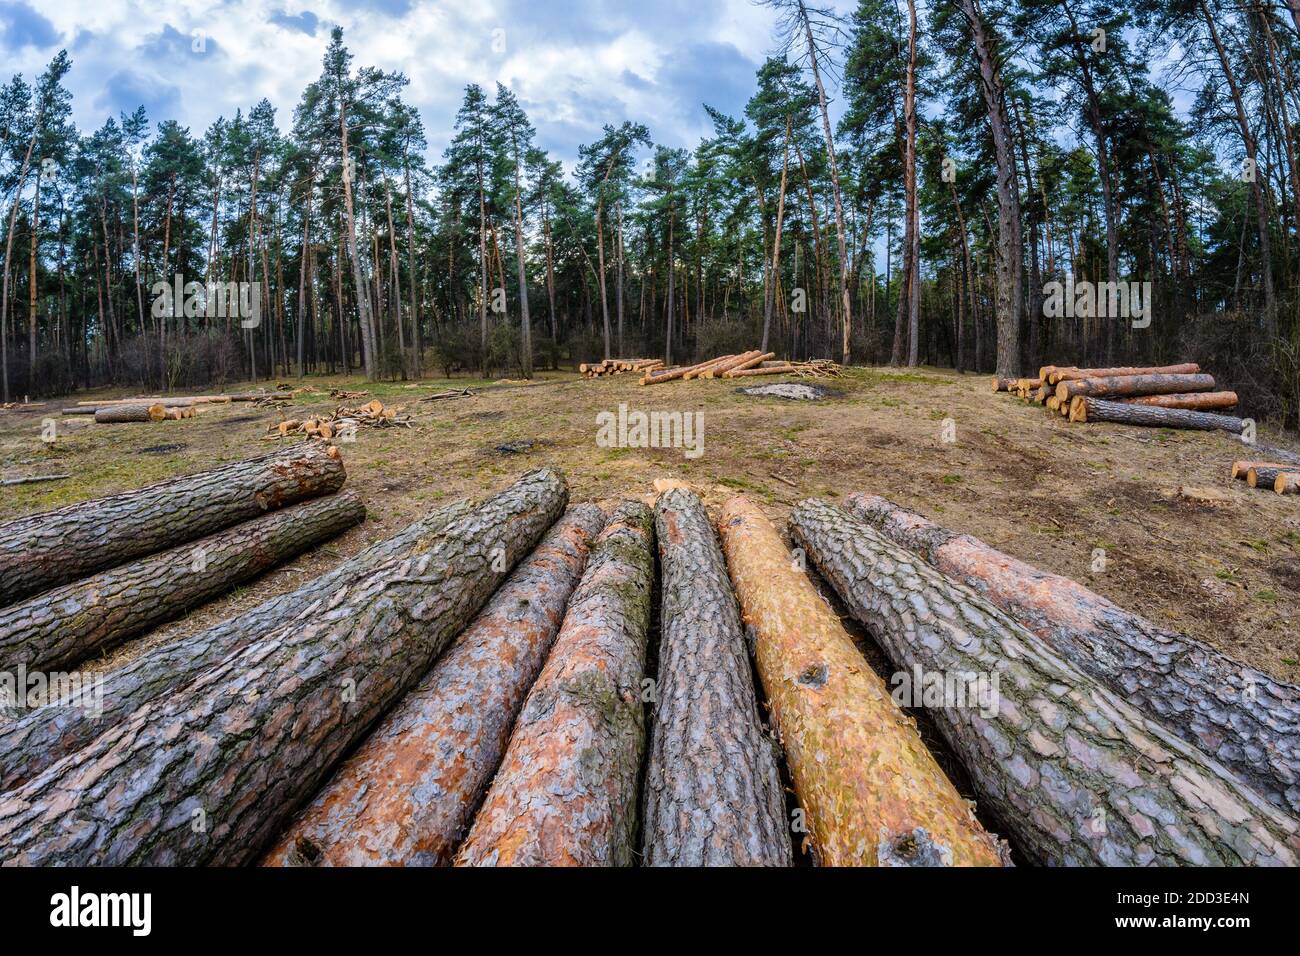 Logging and deforestation.The destruction of the environment. Stock Photo